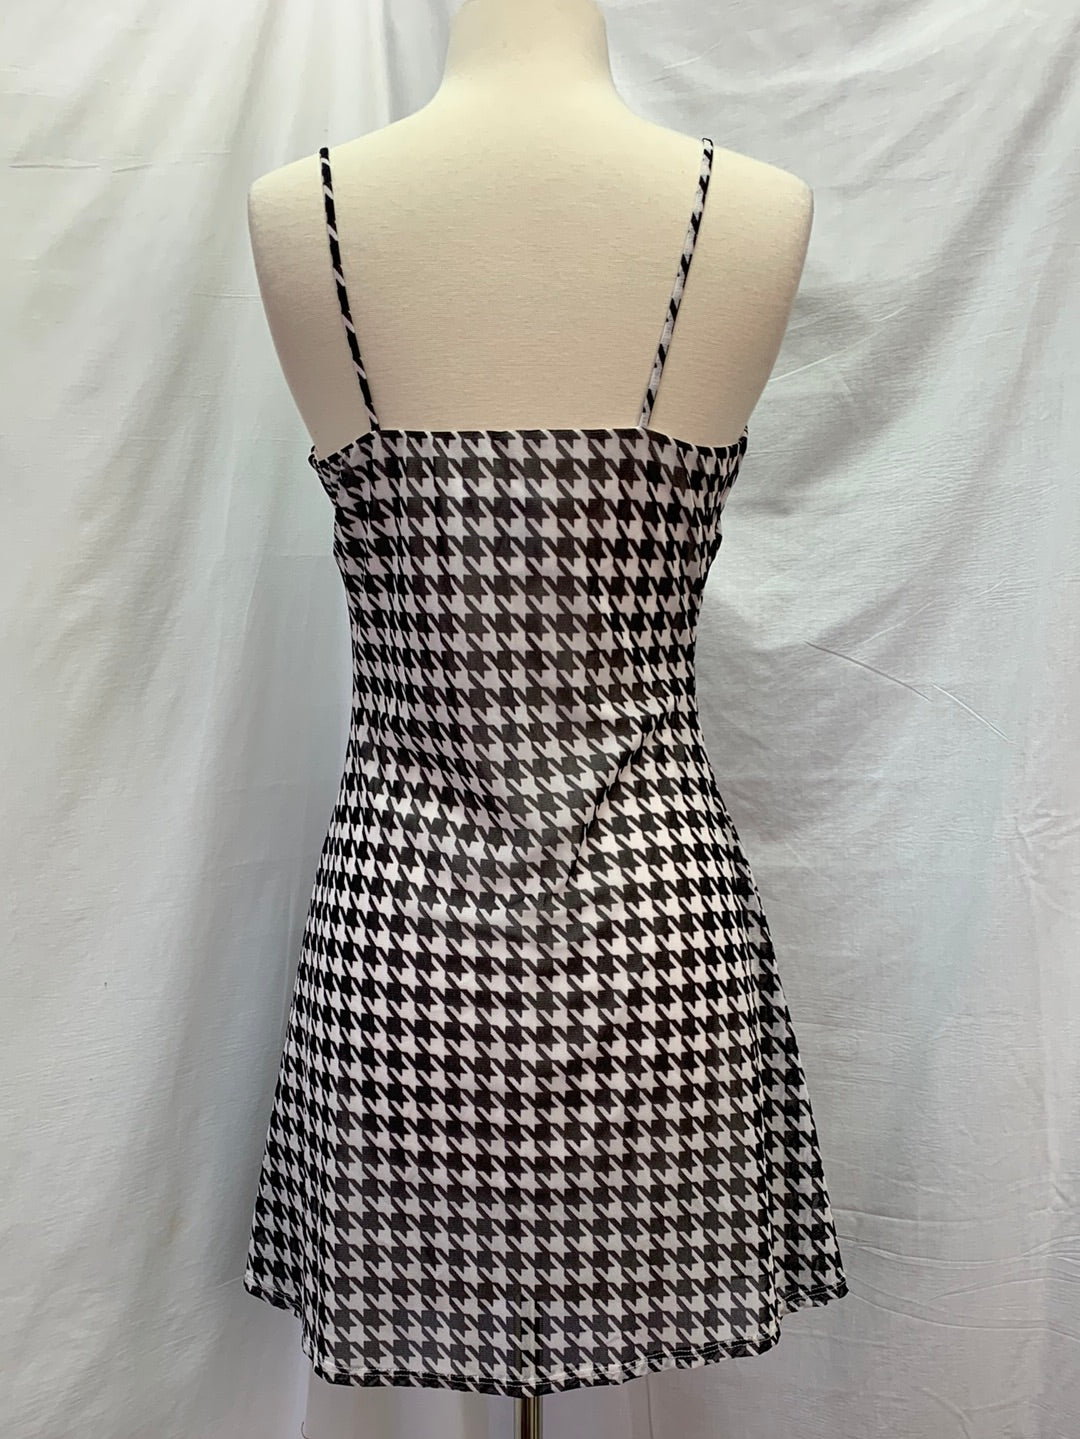 NWT - CES FEMME black white Mesh Houndstooth Pleated Sleeveless Dress - Small